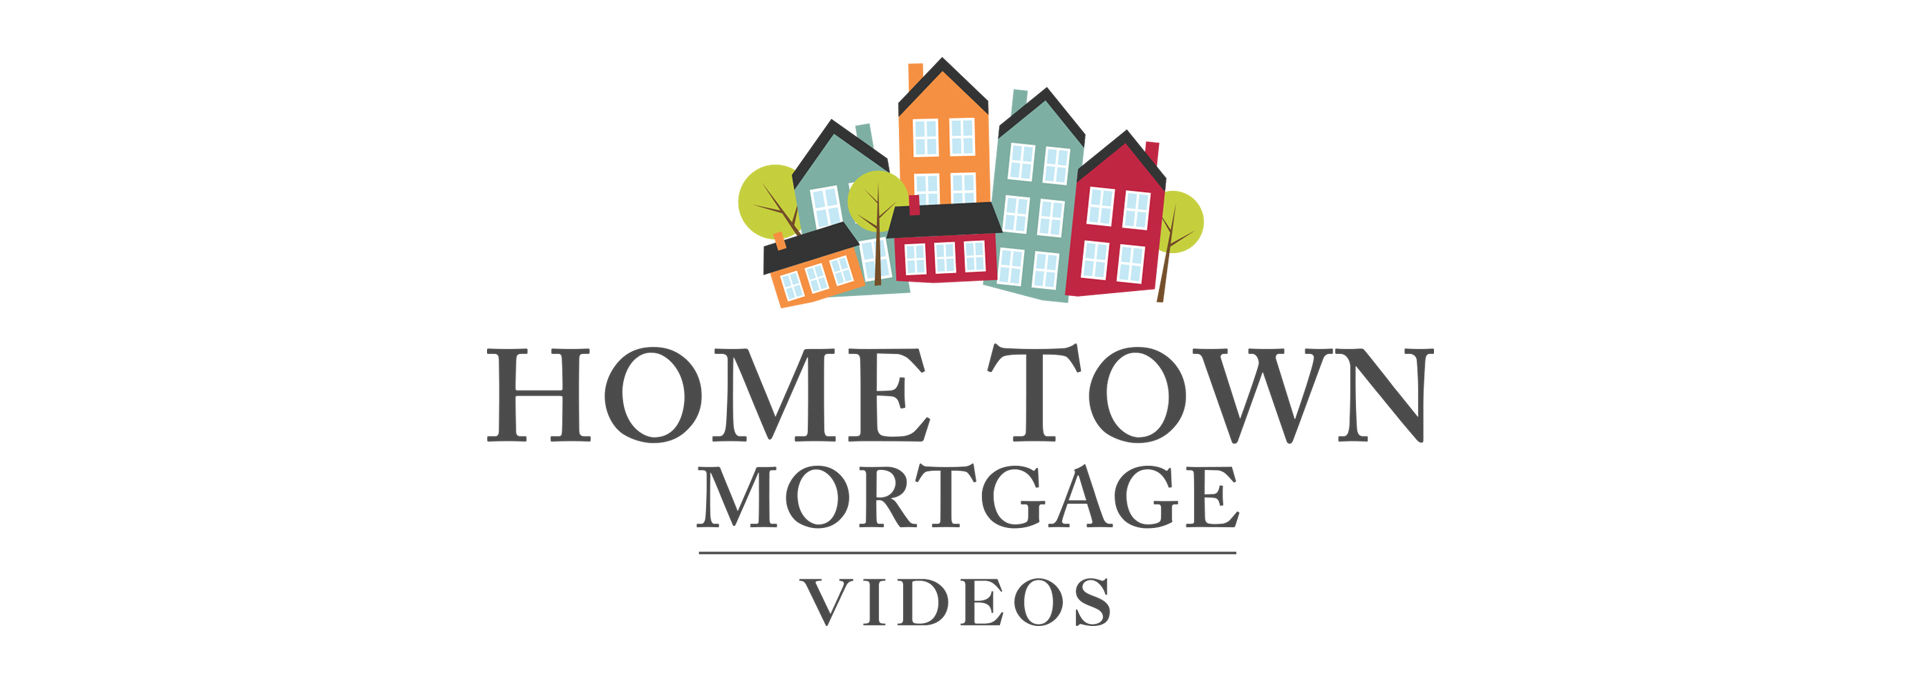 Home Town Mortgage